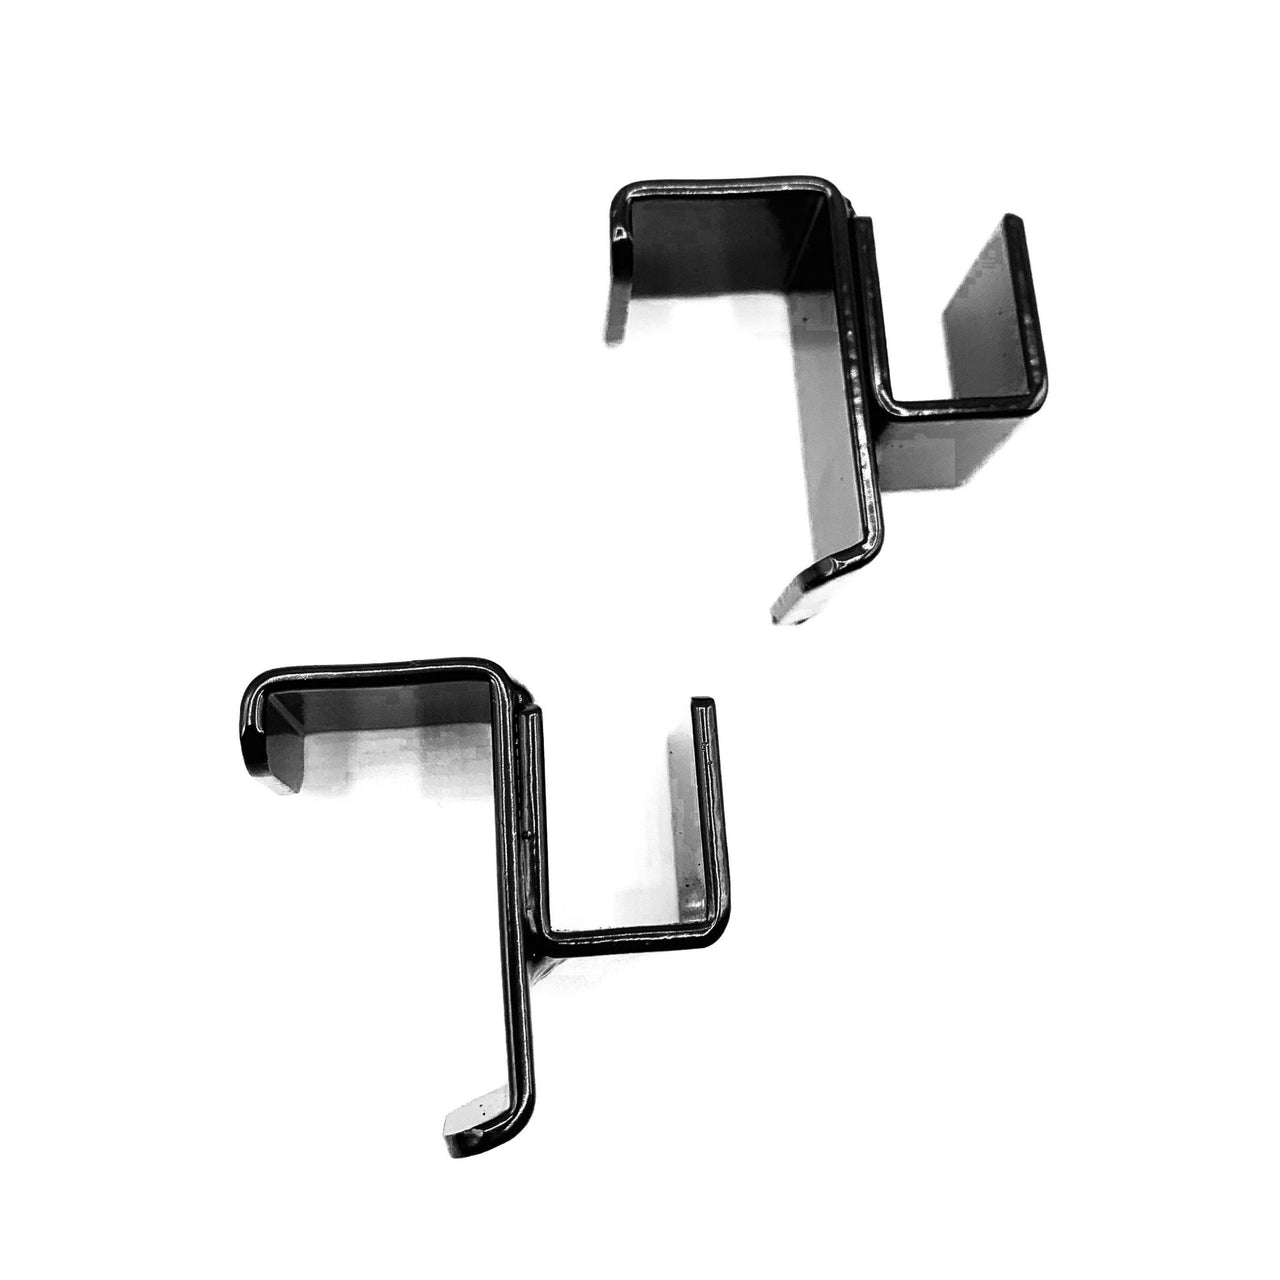 Trough Hook Set (Just two Hooks, no Mounting Rail included).